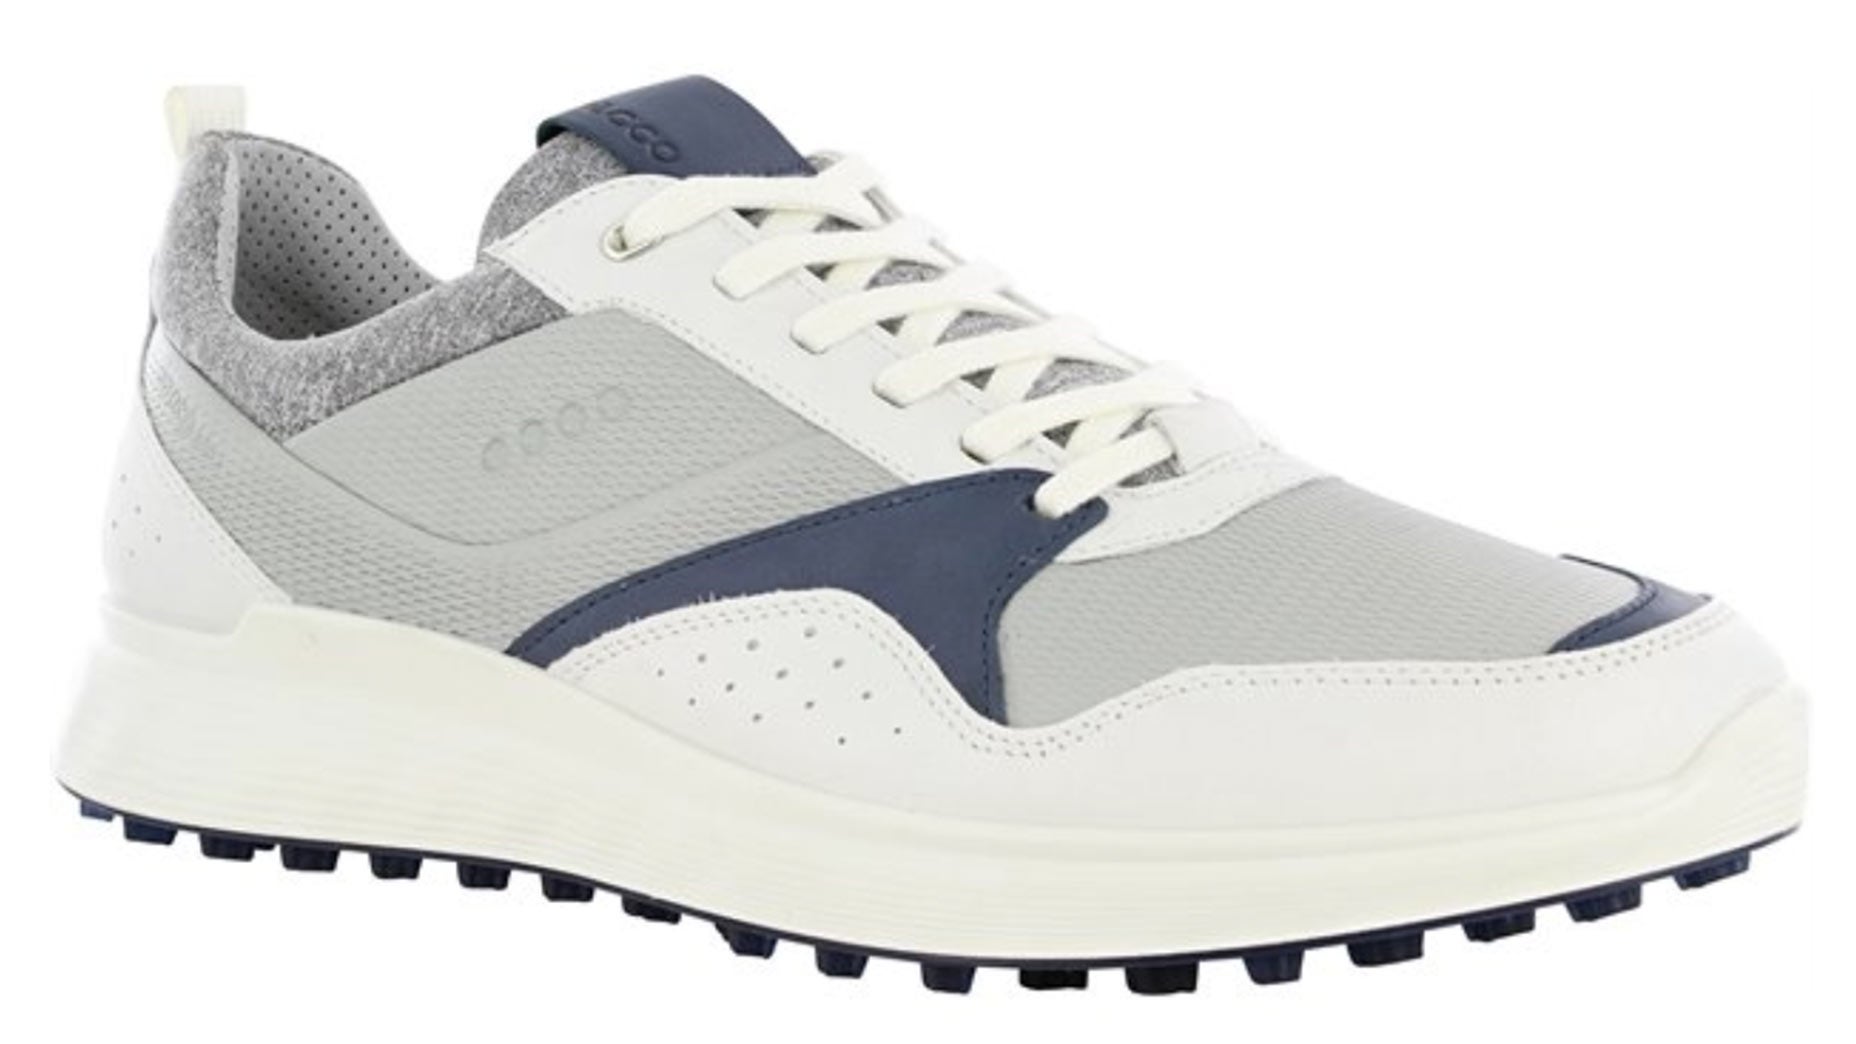 Editor's picks: 6 spikeless golf shoes perfect for on and off the course